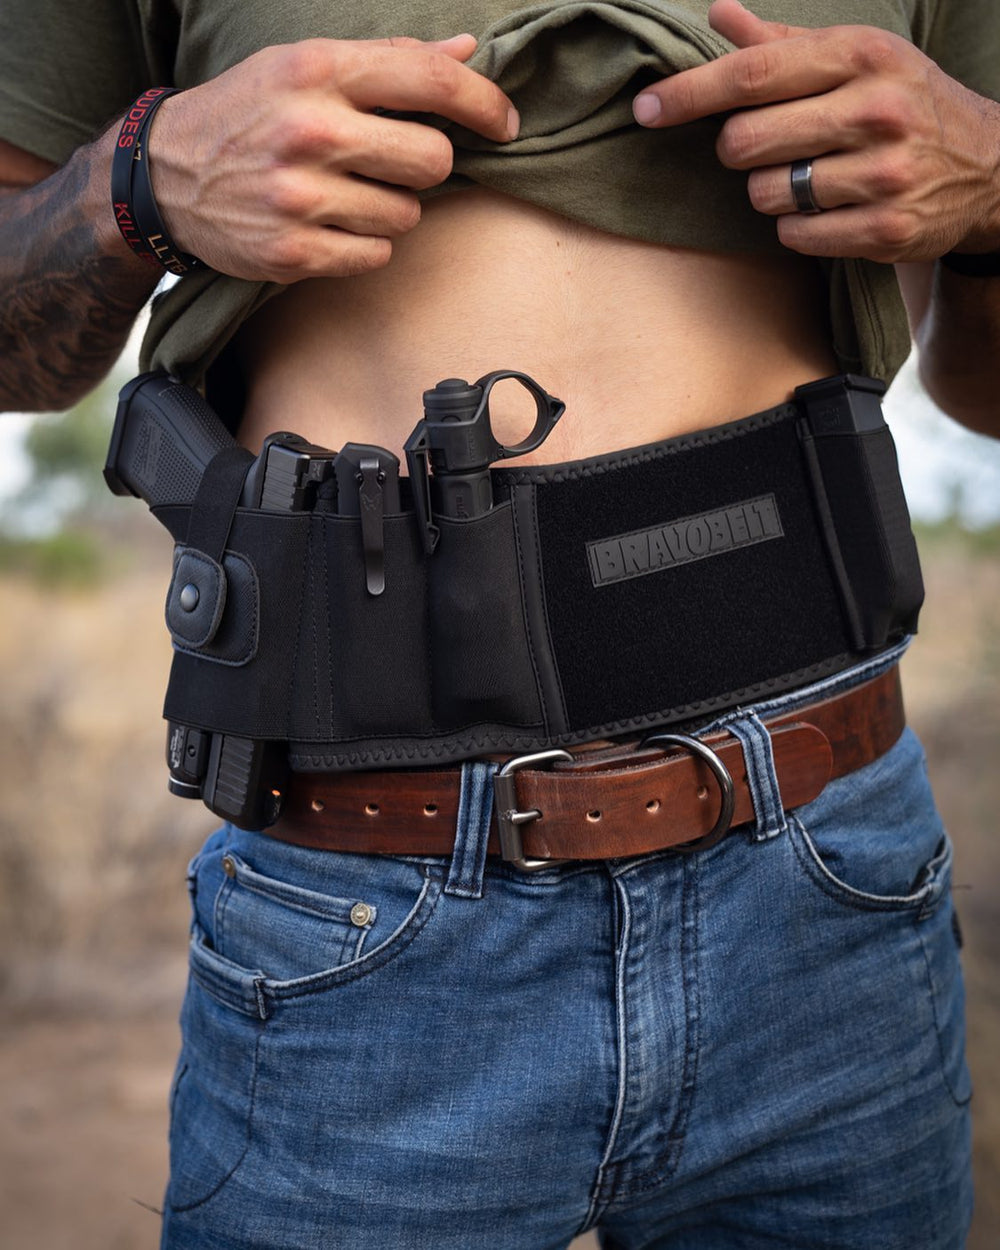 5 Smart Ways to Conceal Carry With a Tucked-In Shirt